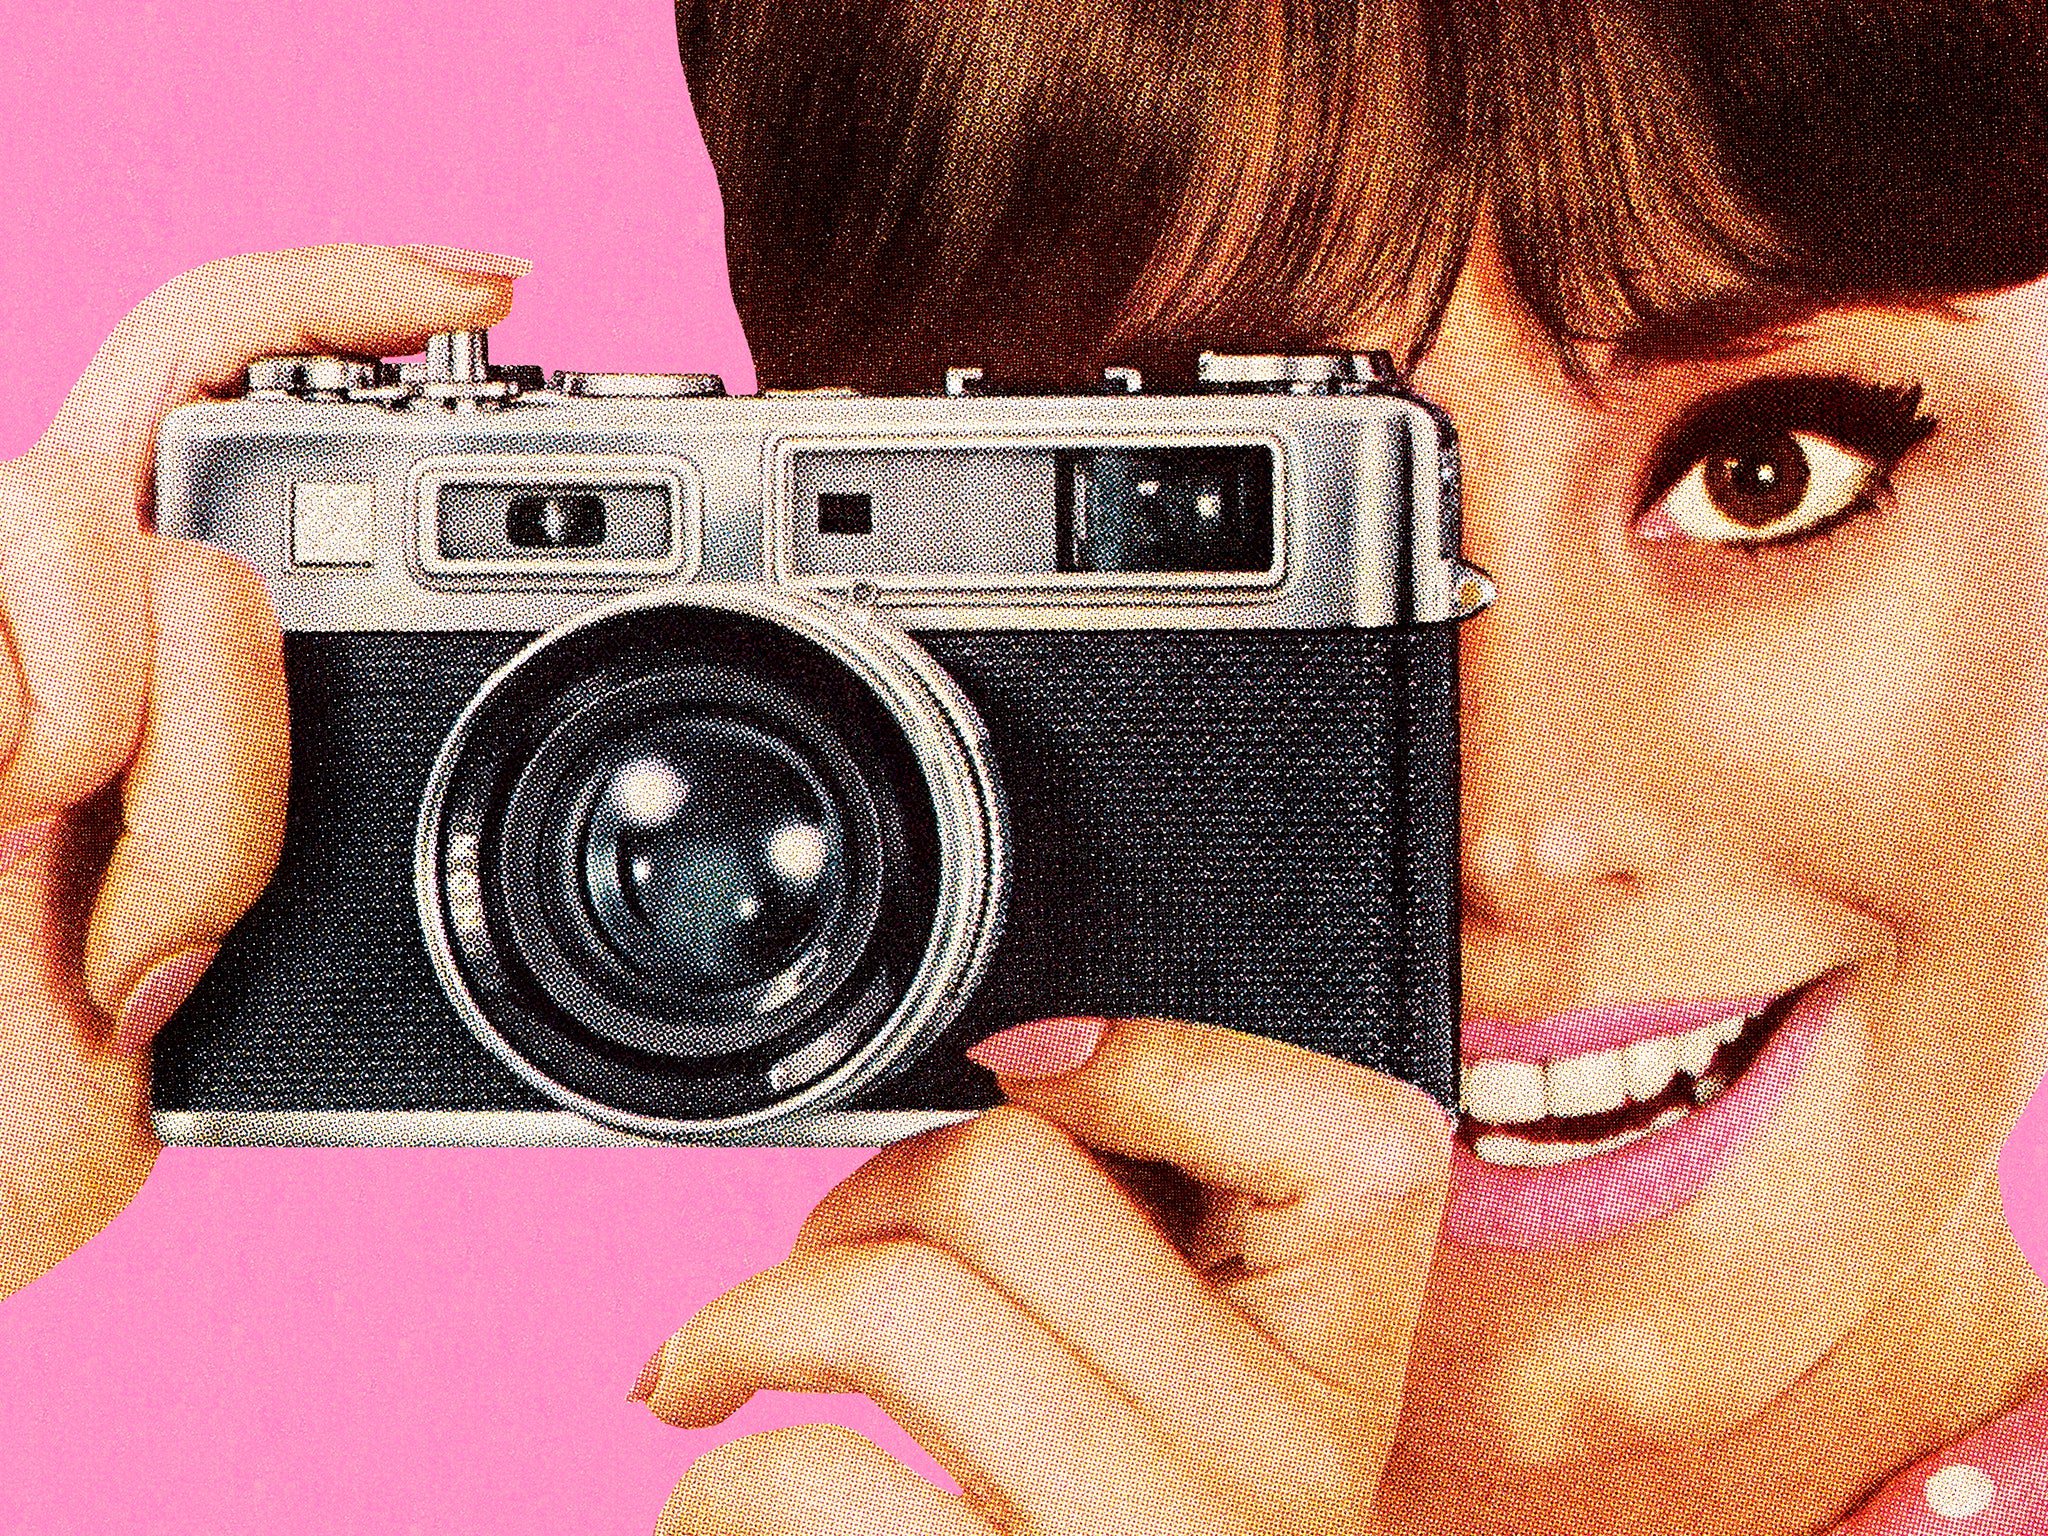 Young people are falling in love with film cameras